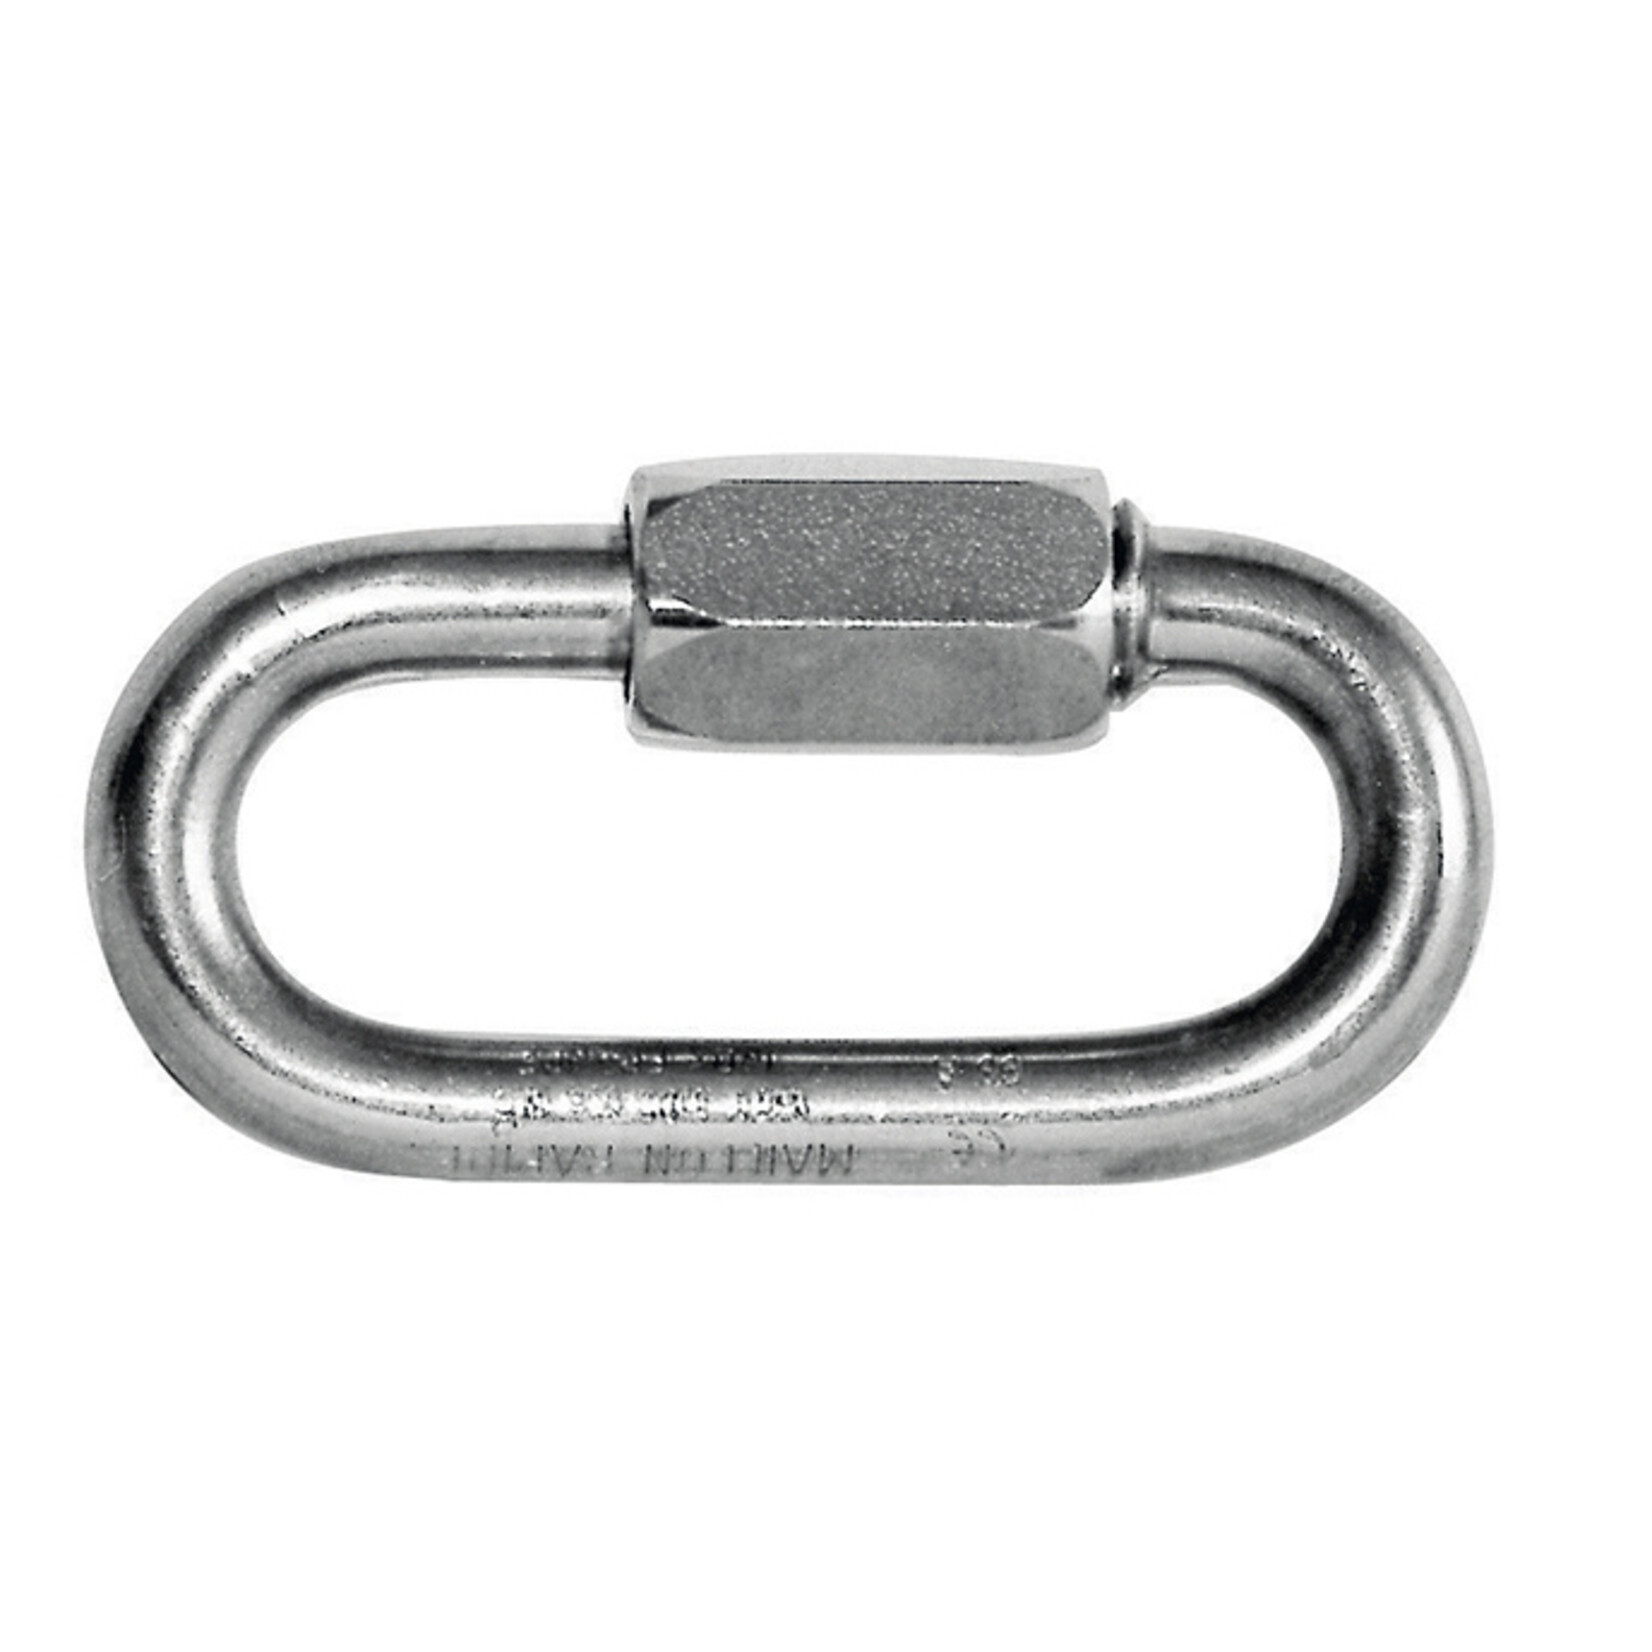 Plastimo Shackle expr galv links dia 10mm